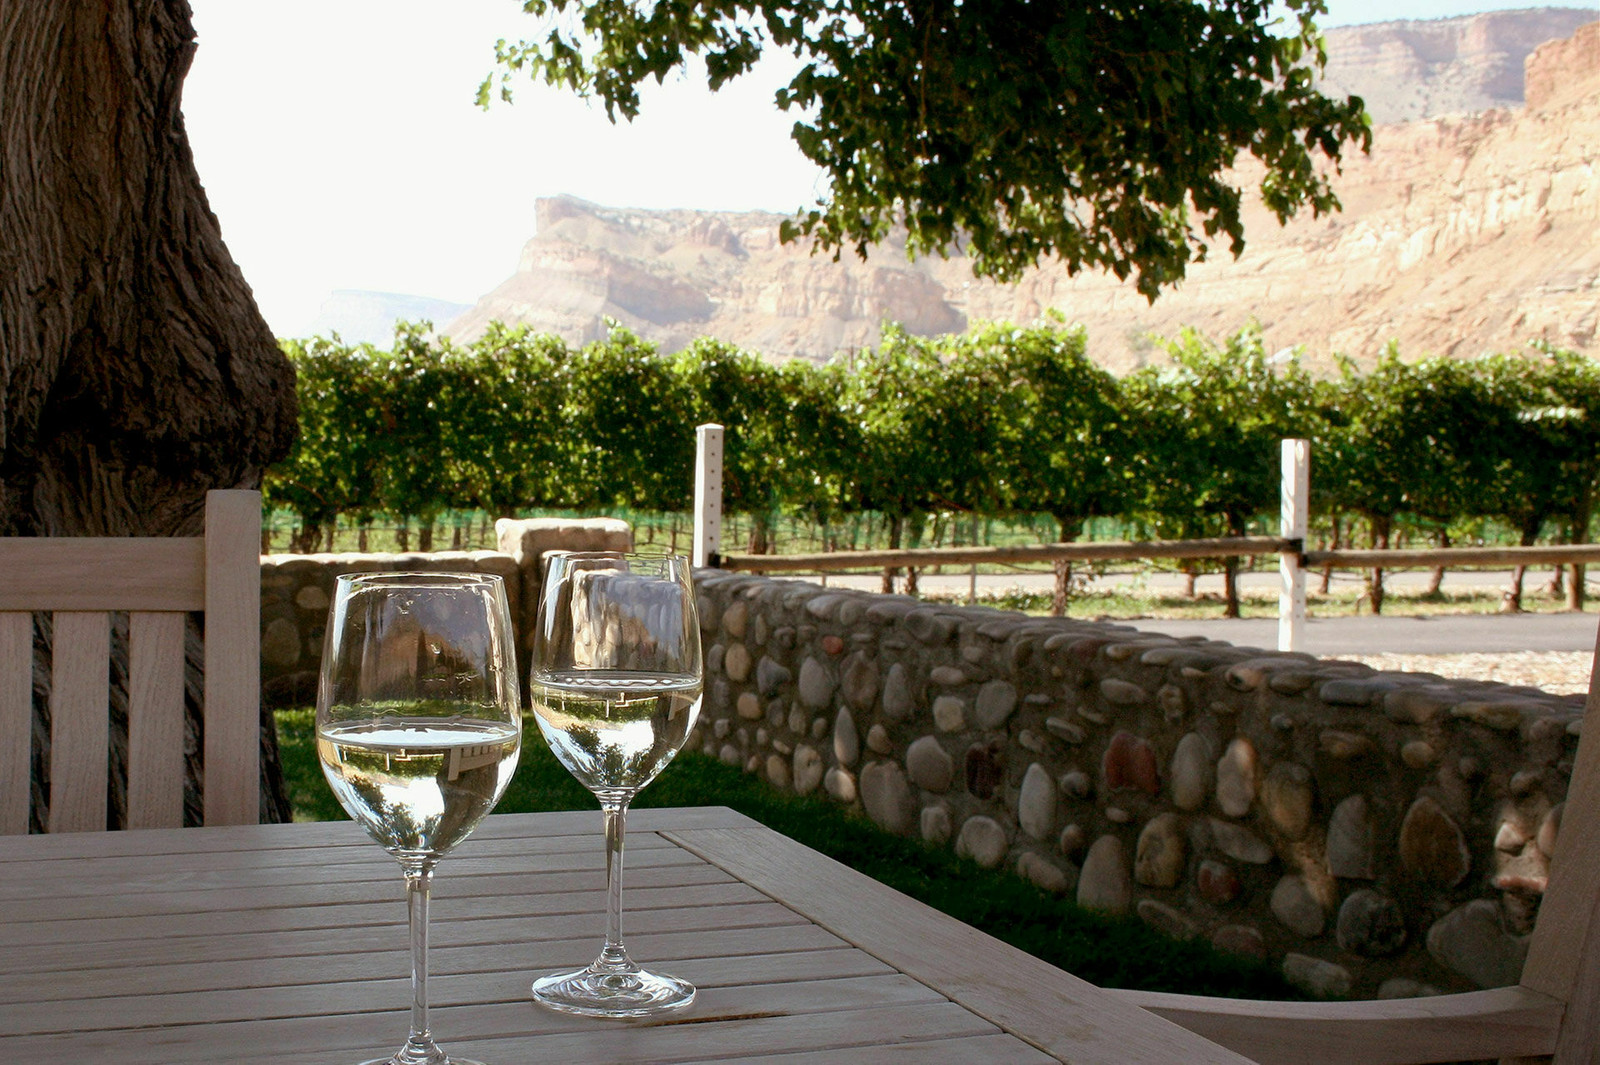 Two glasses of wine on a wooden table. In the background is an orchard and in the far background are tall cliffs.